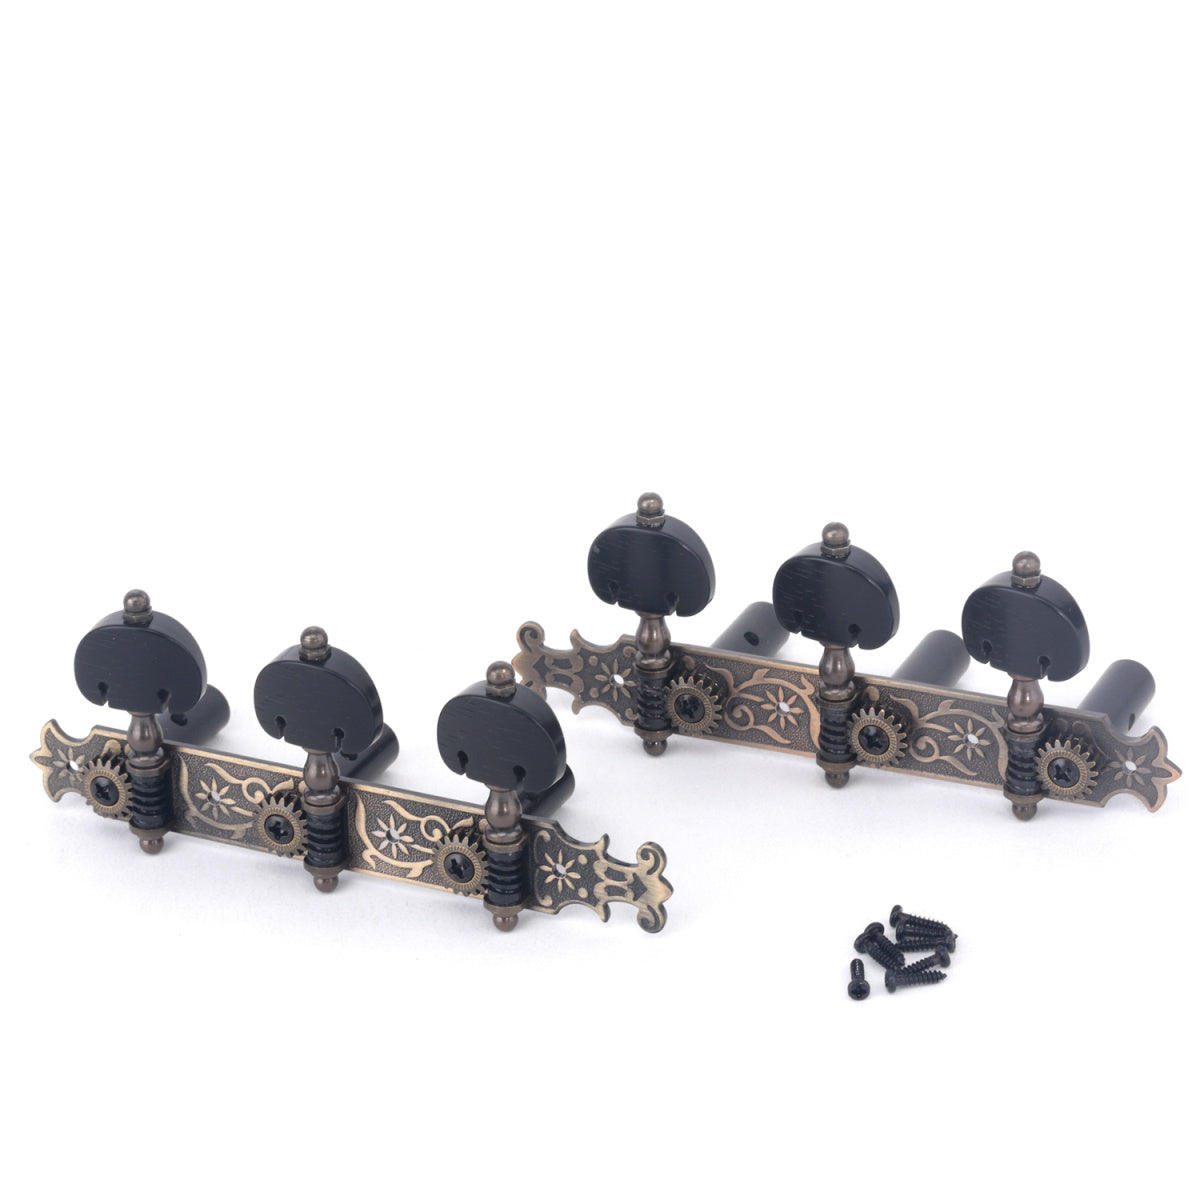 Musiclily Pro 3X3 Bouchet Style Classical Guitar Tuners Tuning Keys Machine Heads Set, Antique Brass